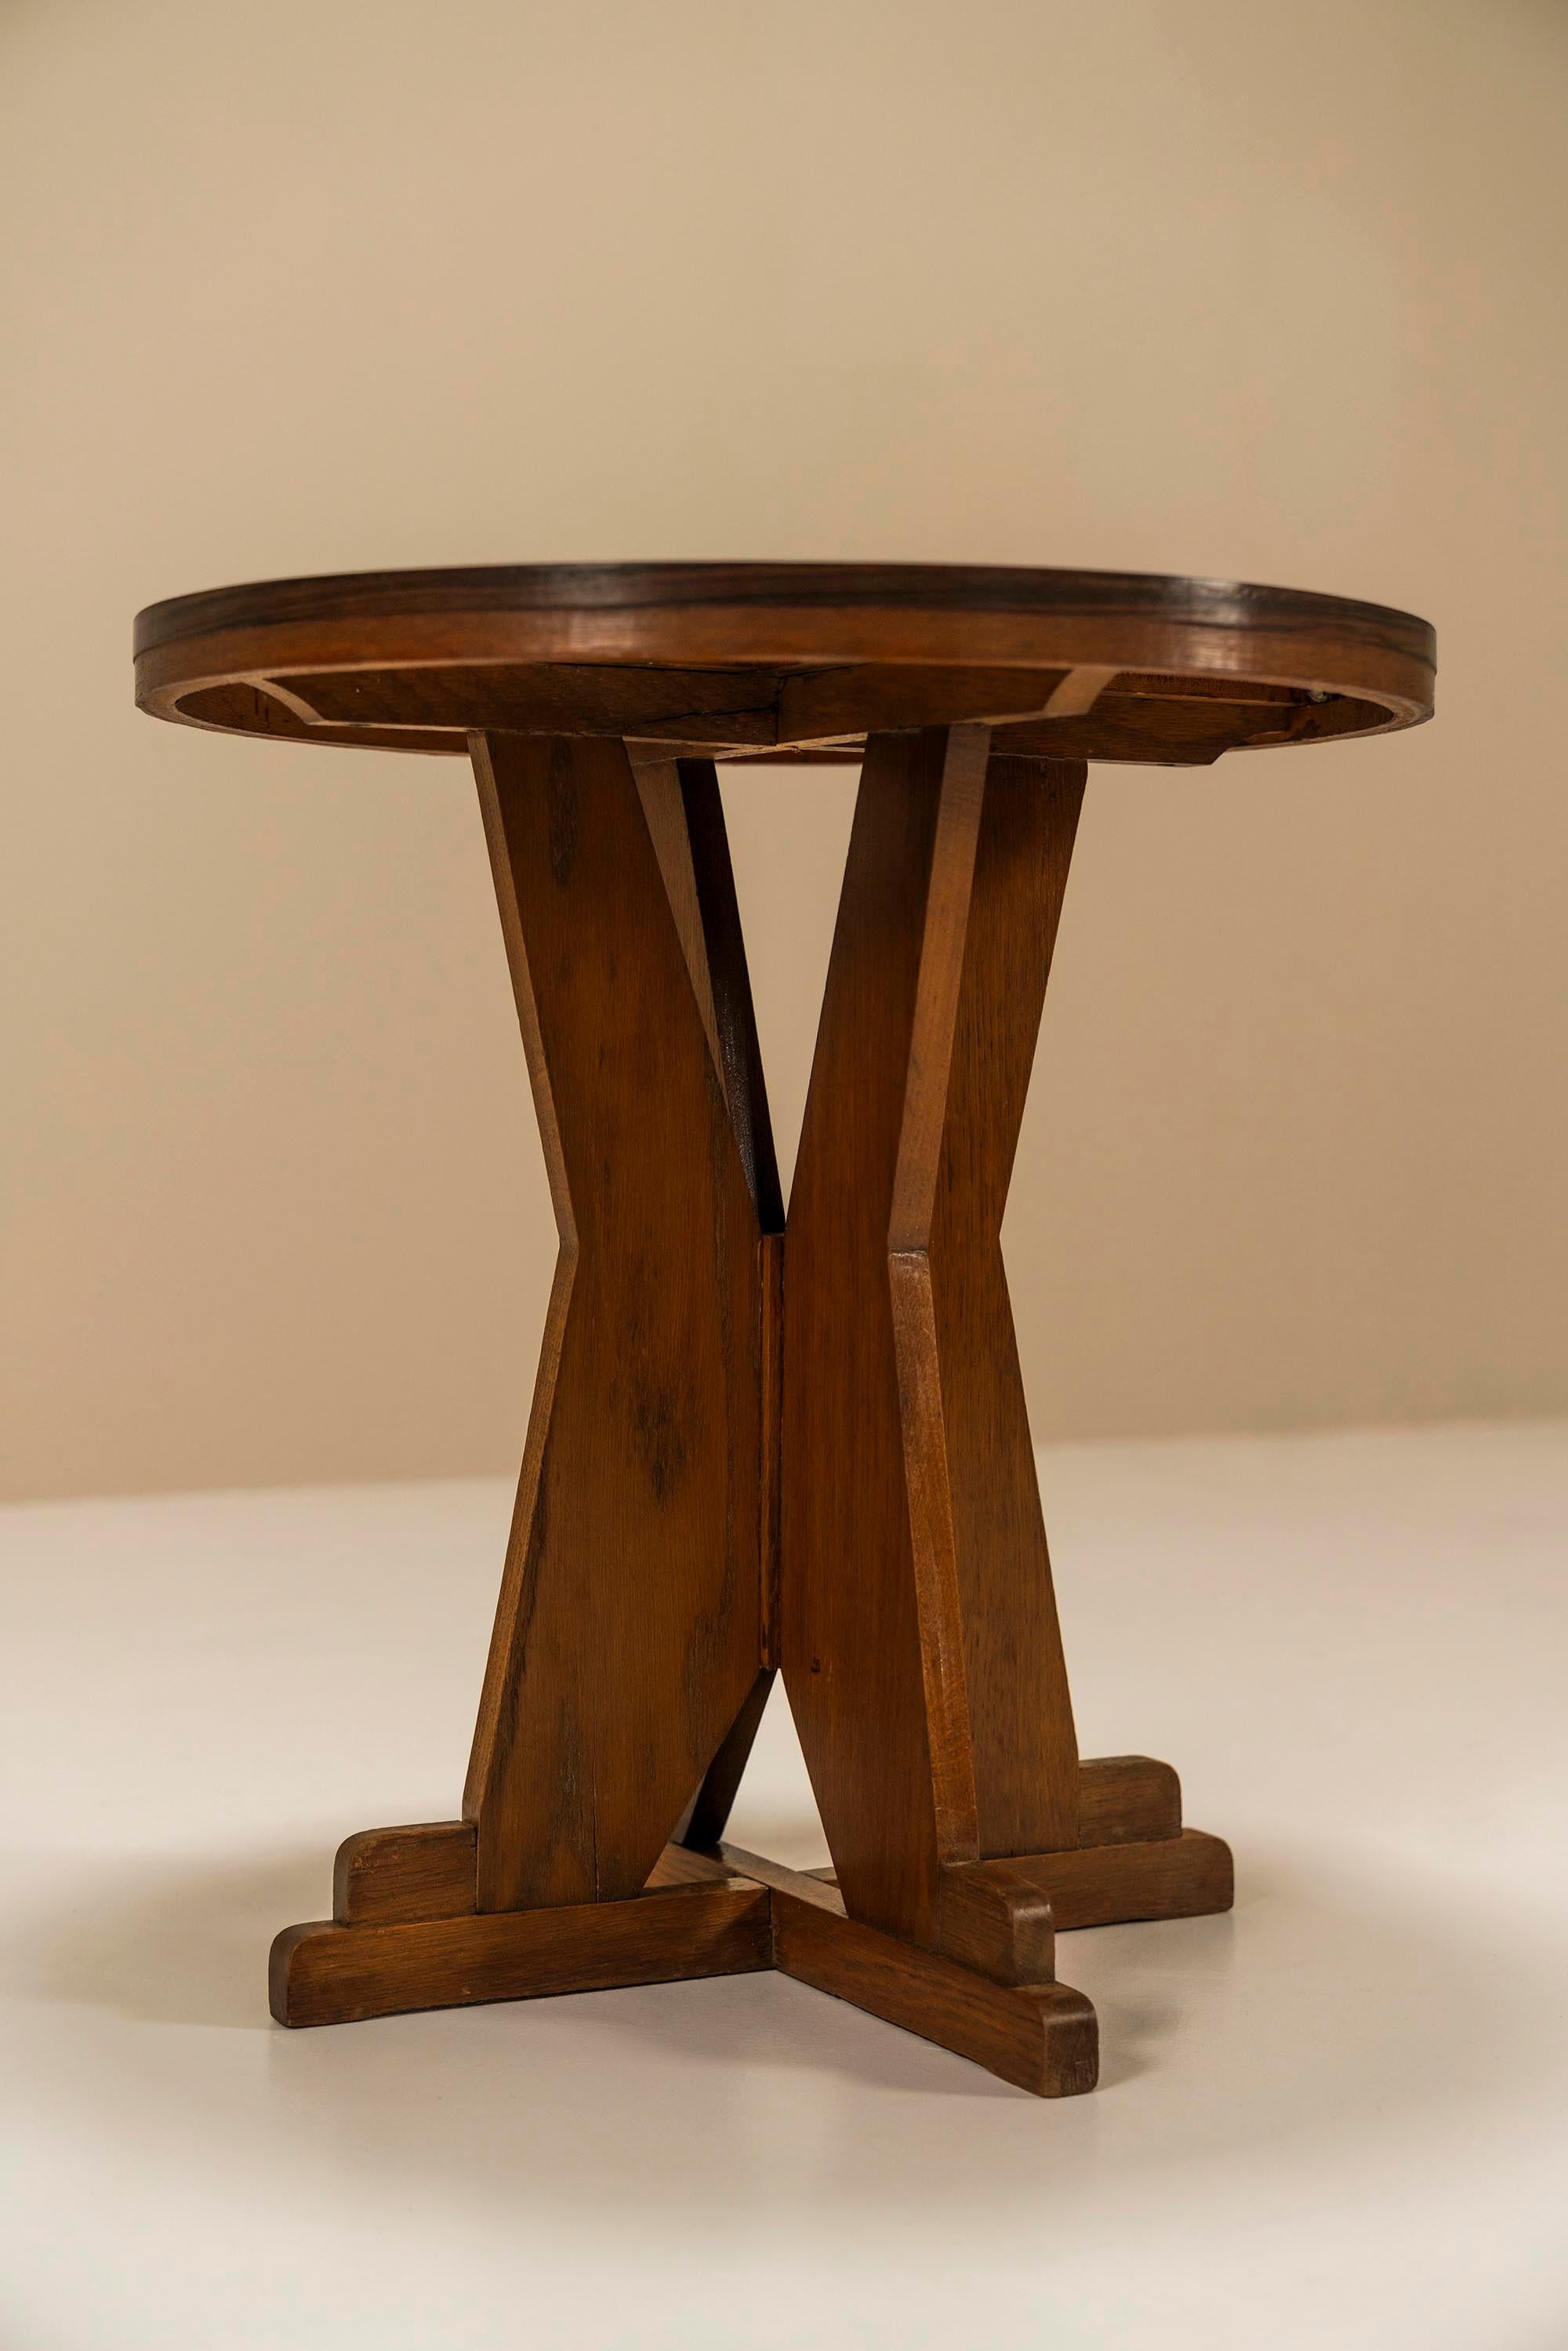 Mid-20th Century Round Amsterdam School Side Table In Oak And Ebony, Netherlands 1930s